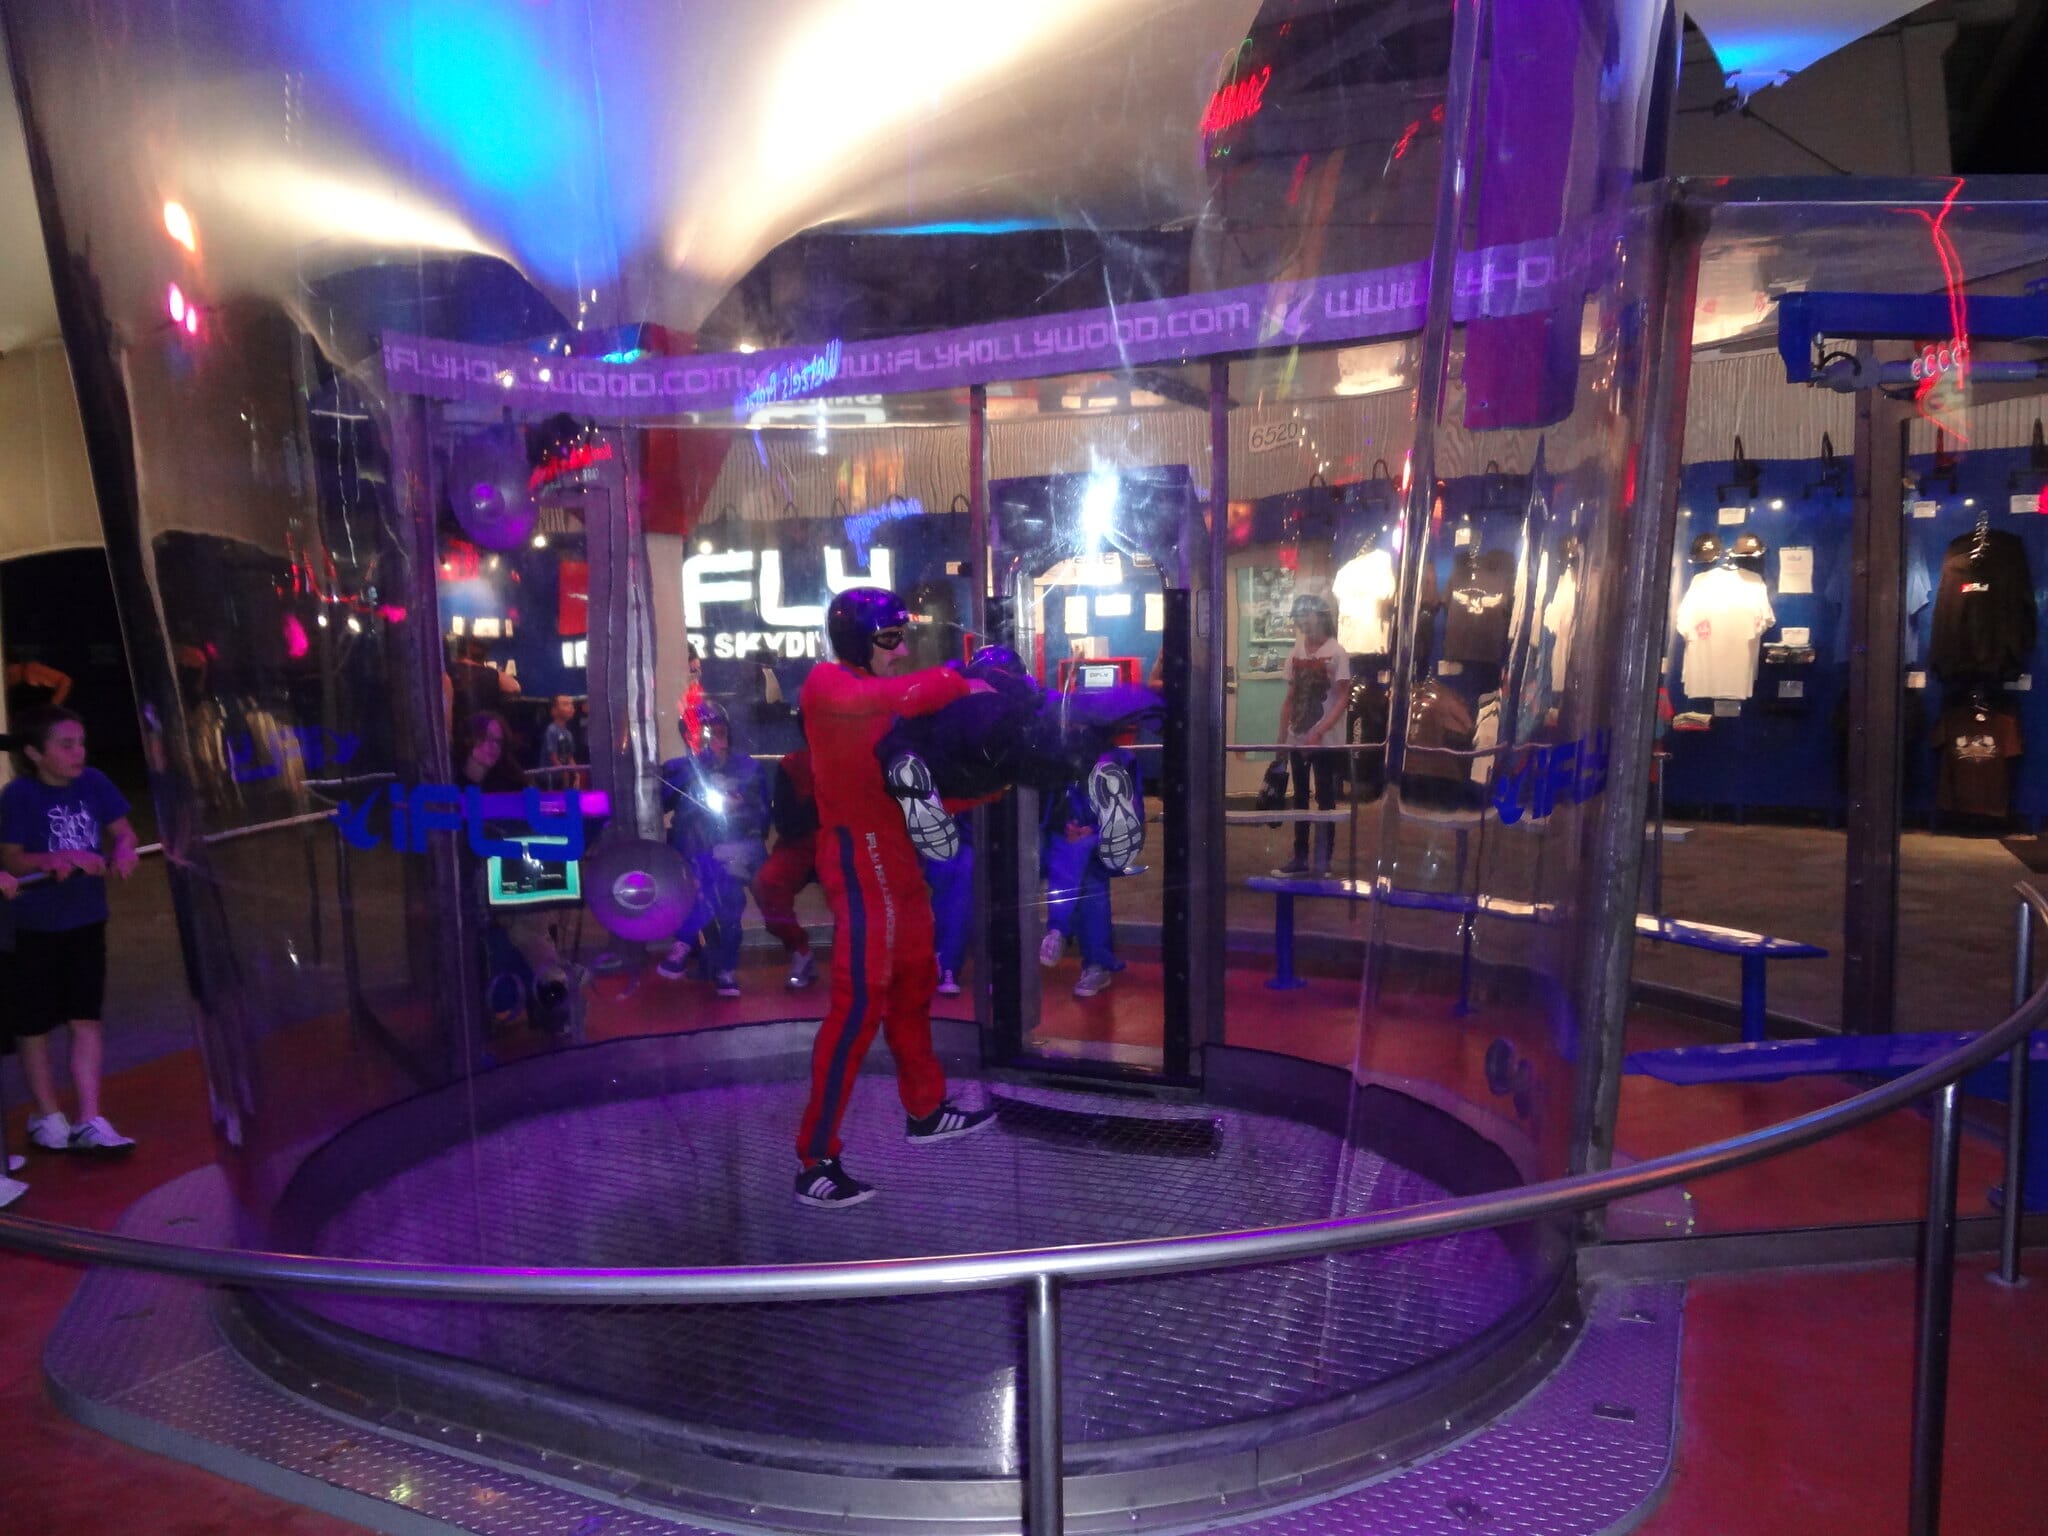 Indoor skydiving with iFly, one of the most fun things to do in Orlando for adults